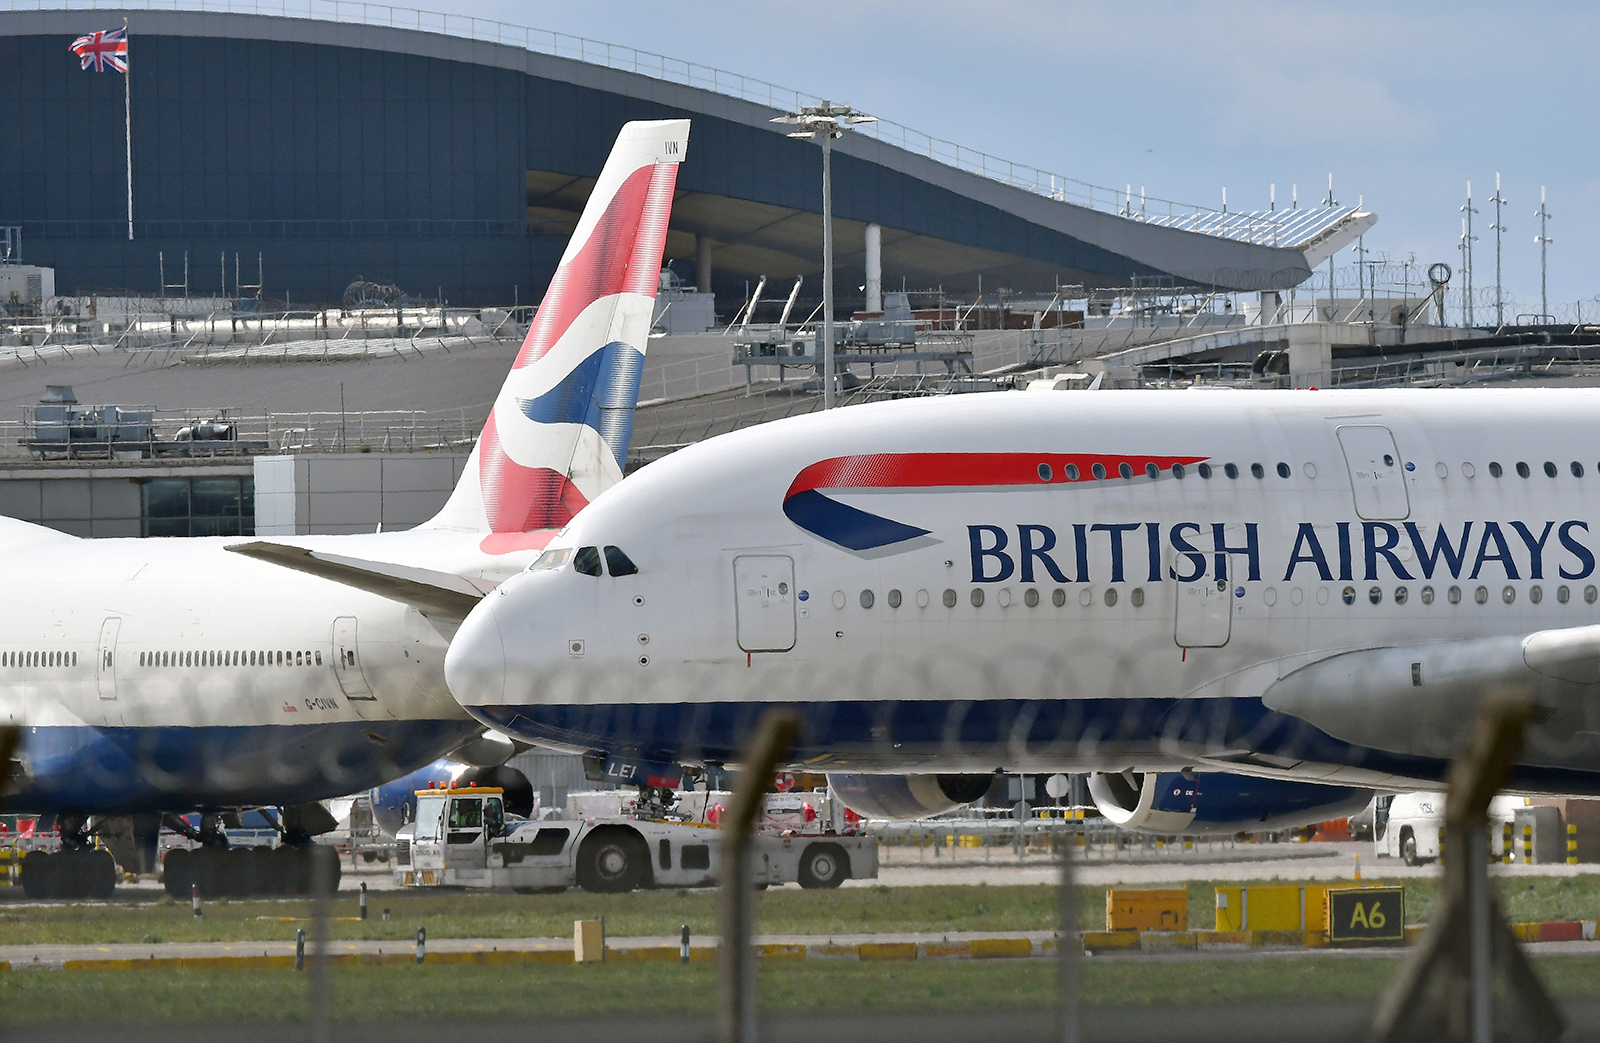 A British Airways Airbus A380 passenger jet is moved by an aircraft tractor at London's Heathrow Airport, on April 2.